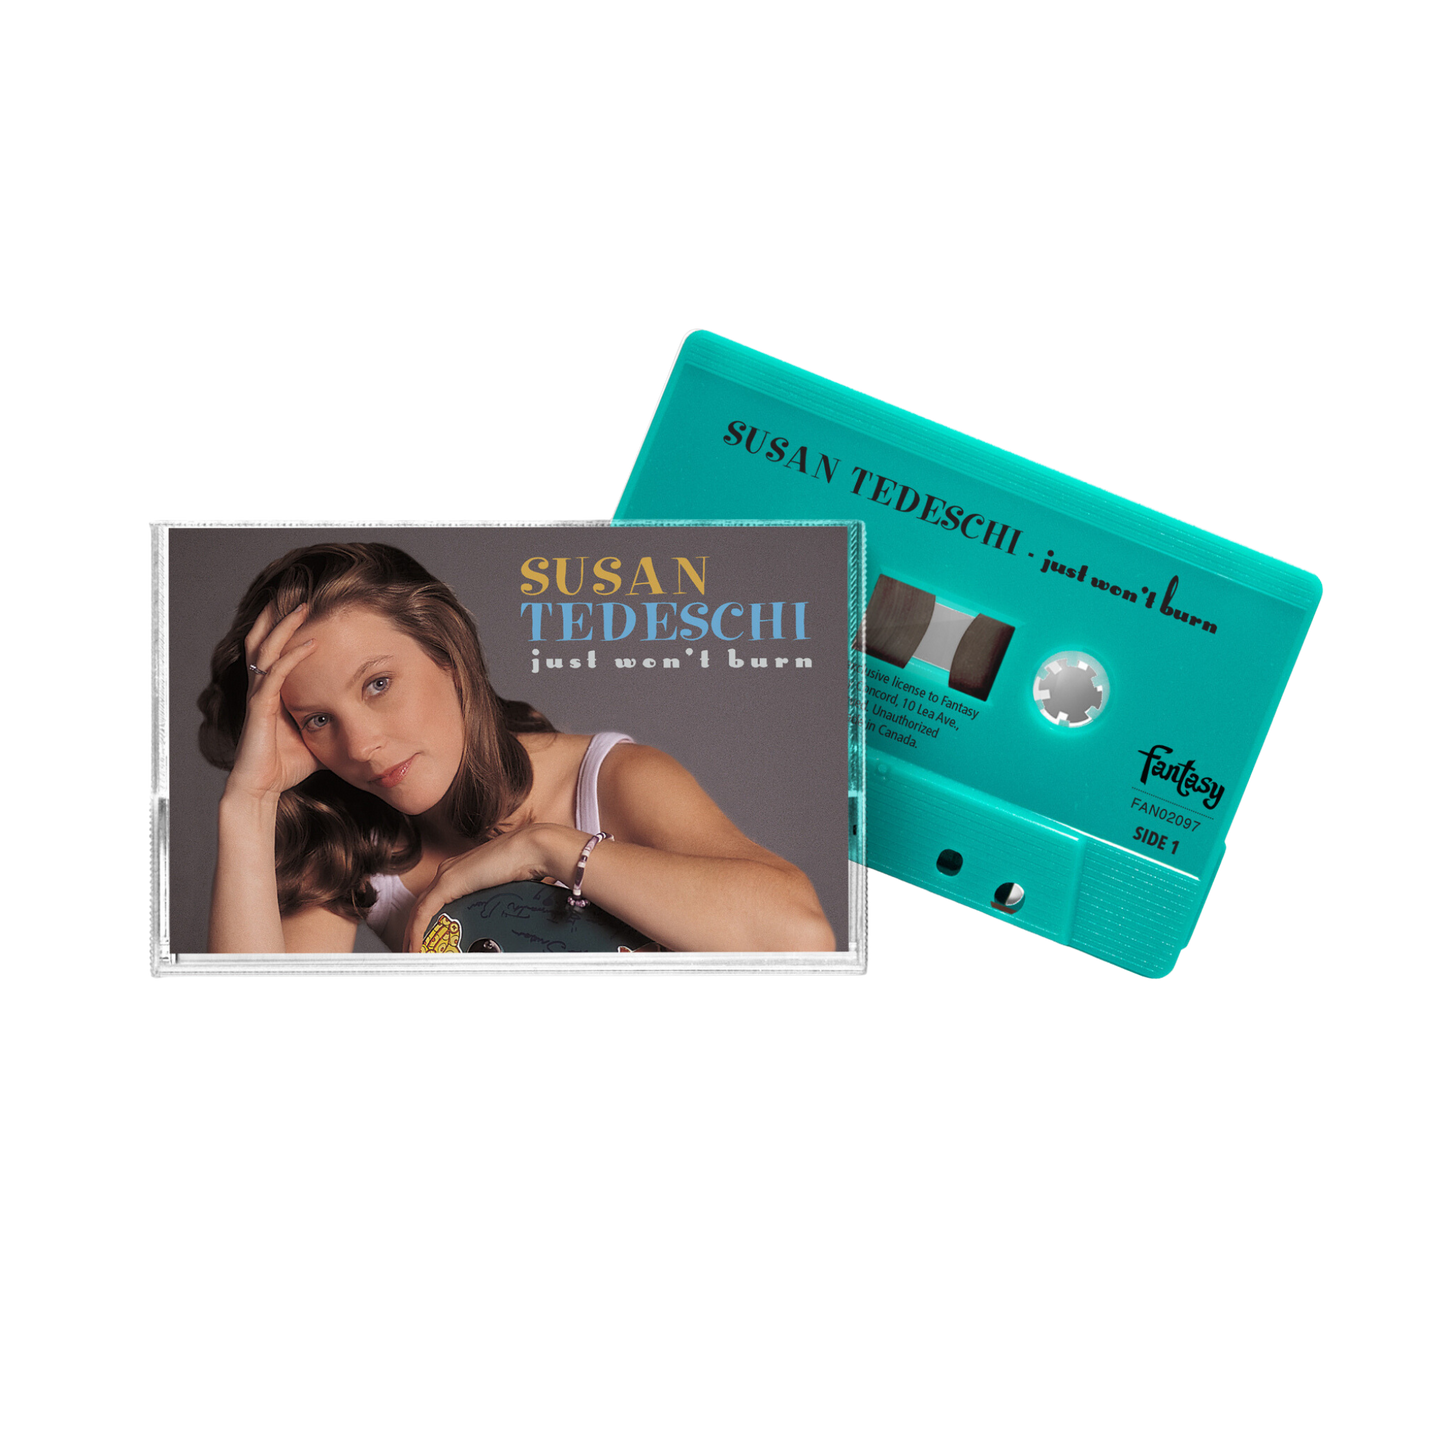 Just Won’t Burn (25th Anniversary Deluxe Edition) Cassette